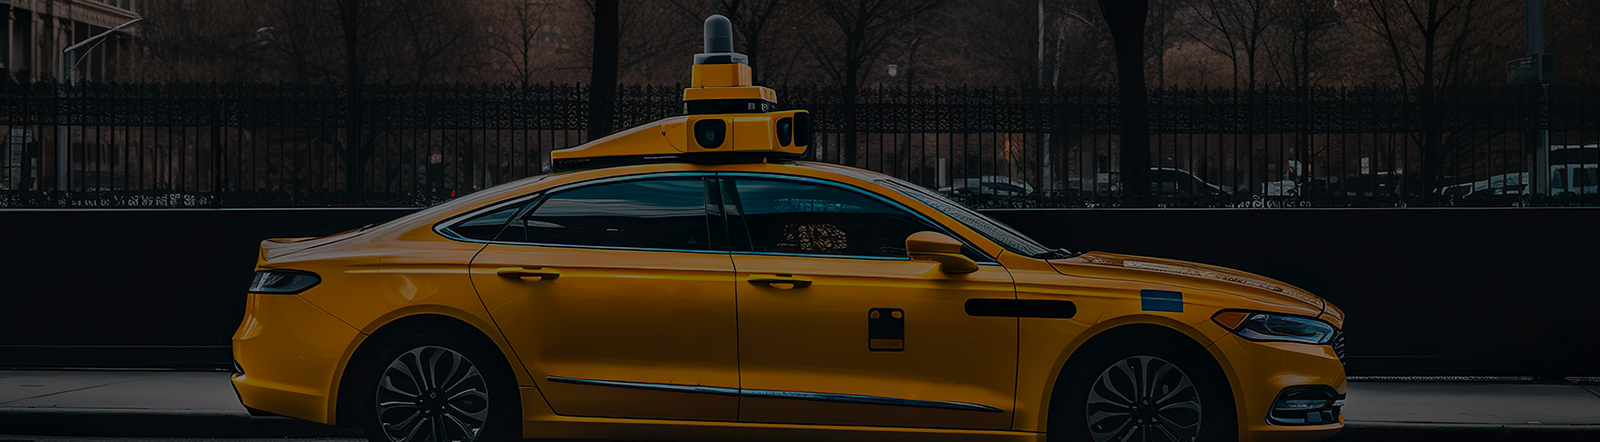 Commercialising China’s “robotaxi”